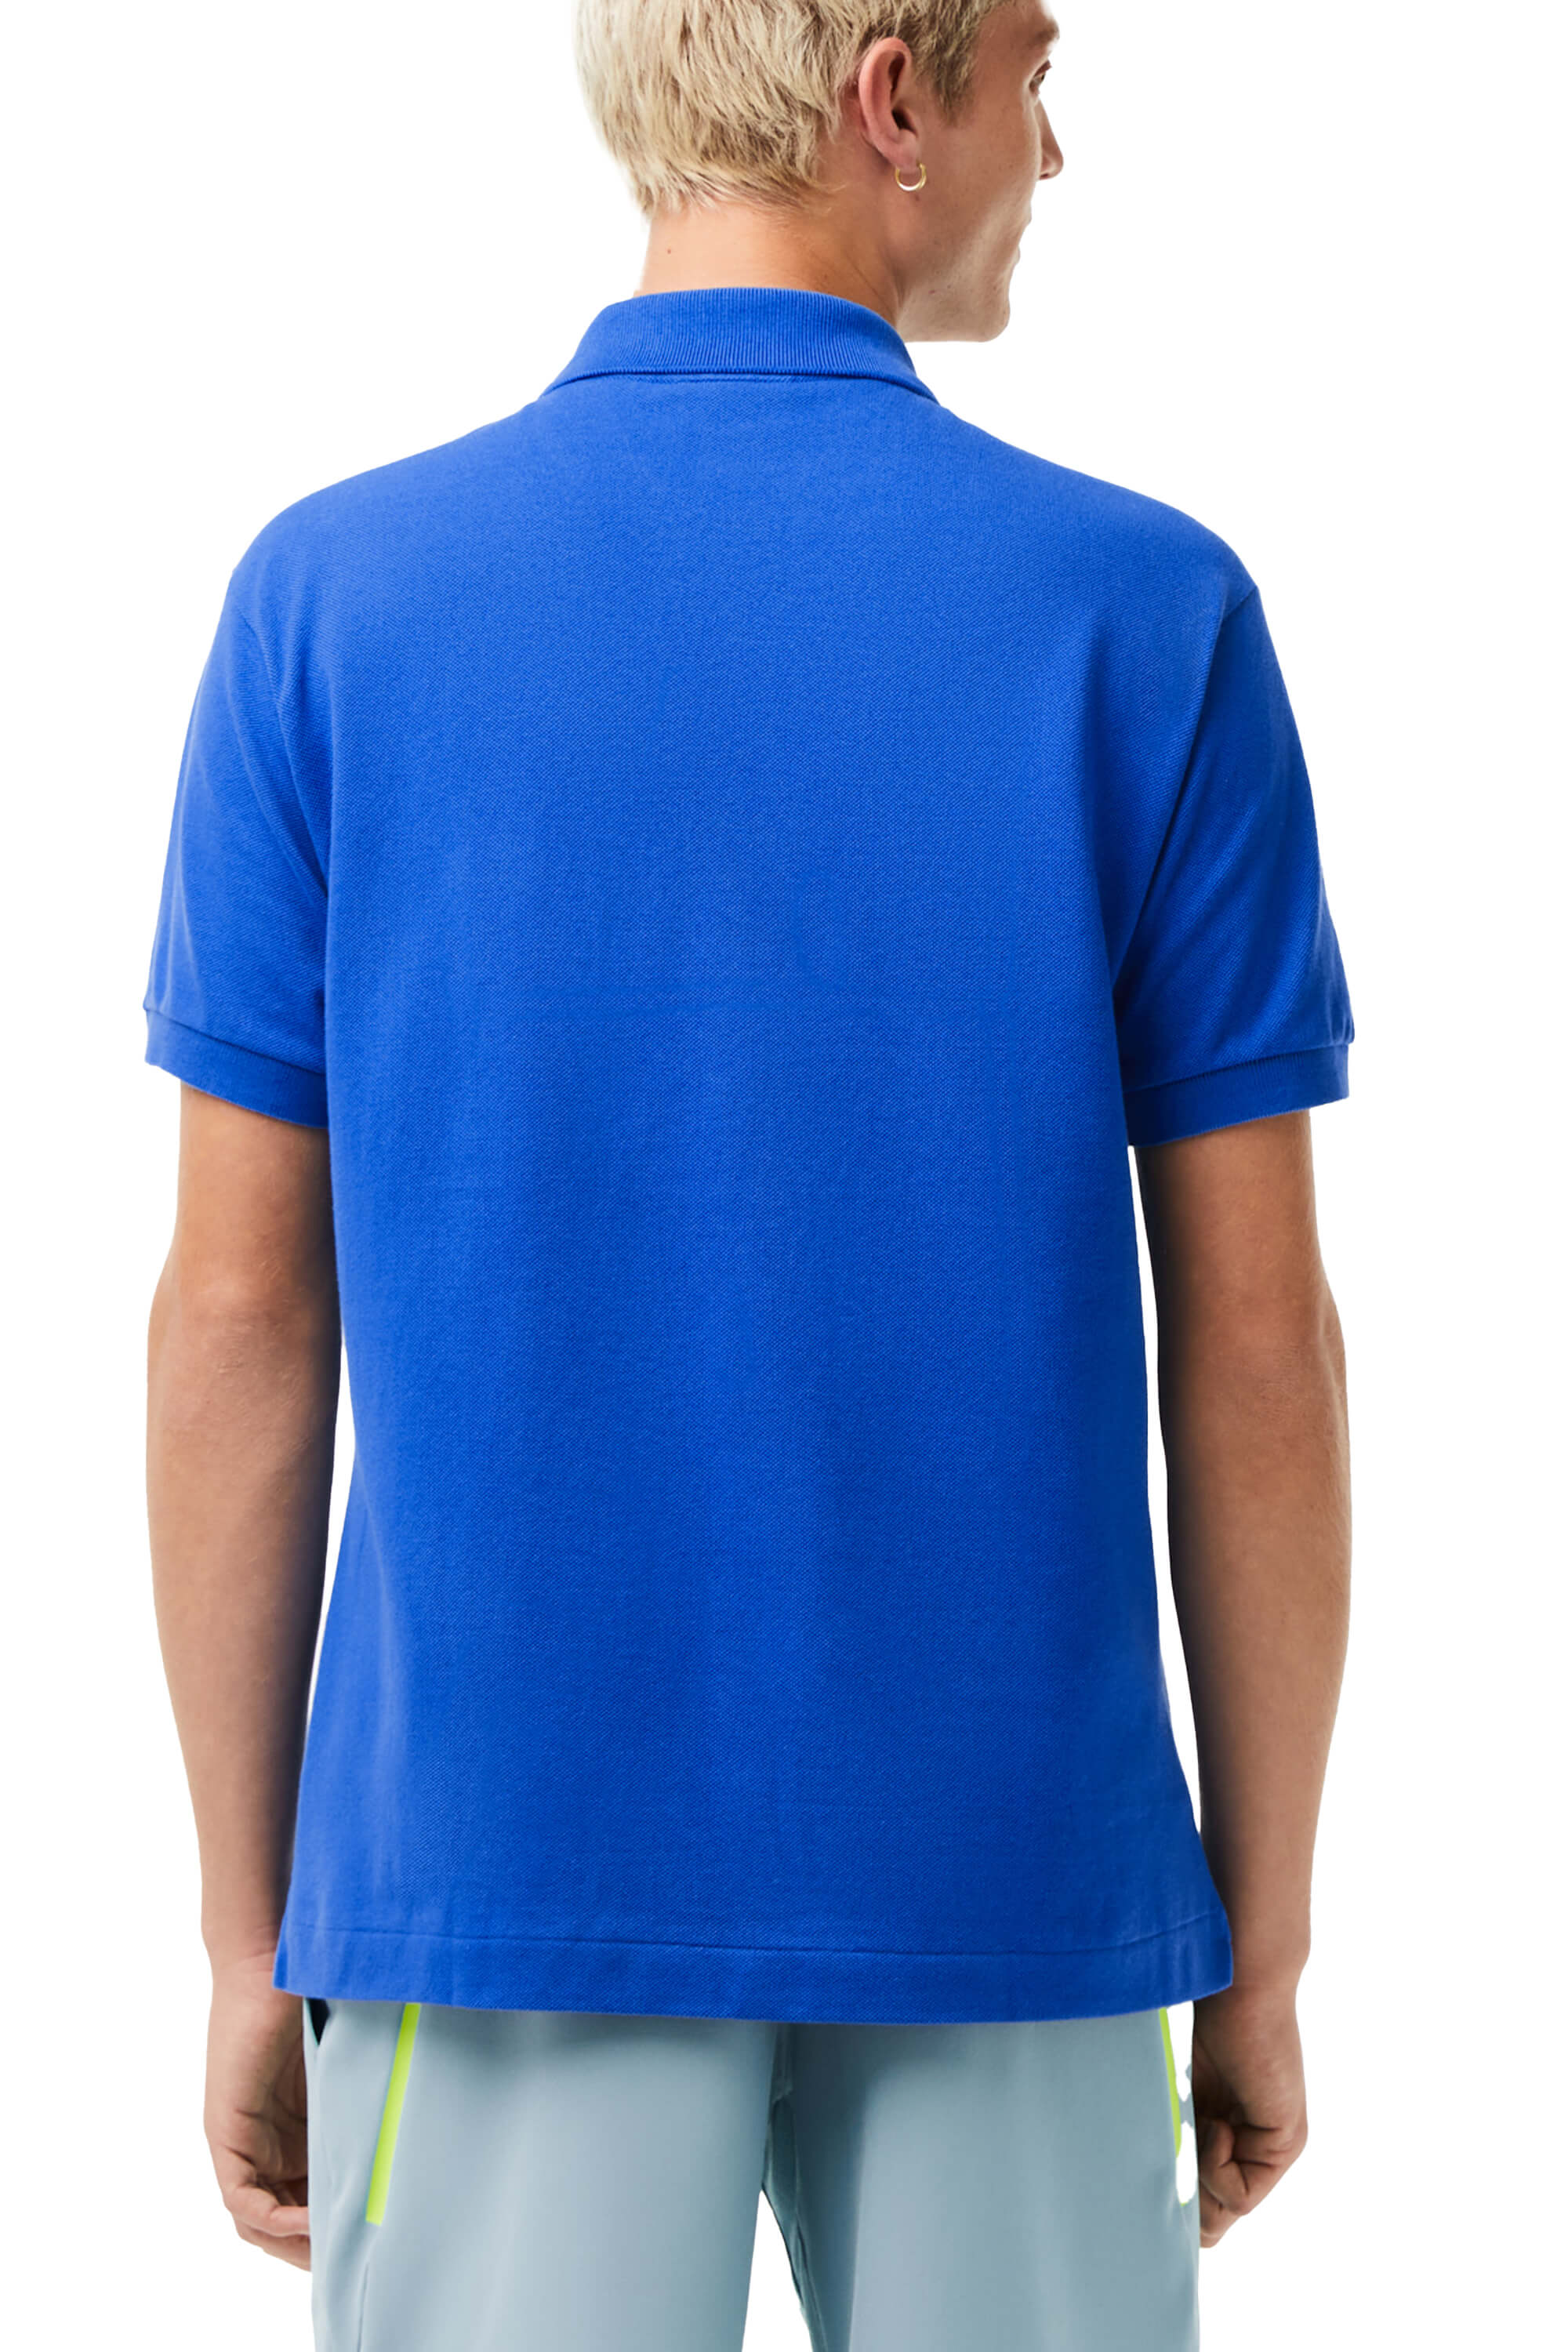 Lacoste Classic Fit Deep Blue Polo